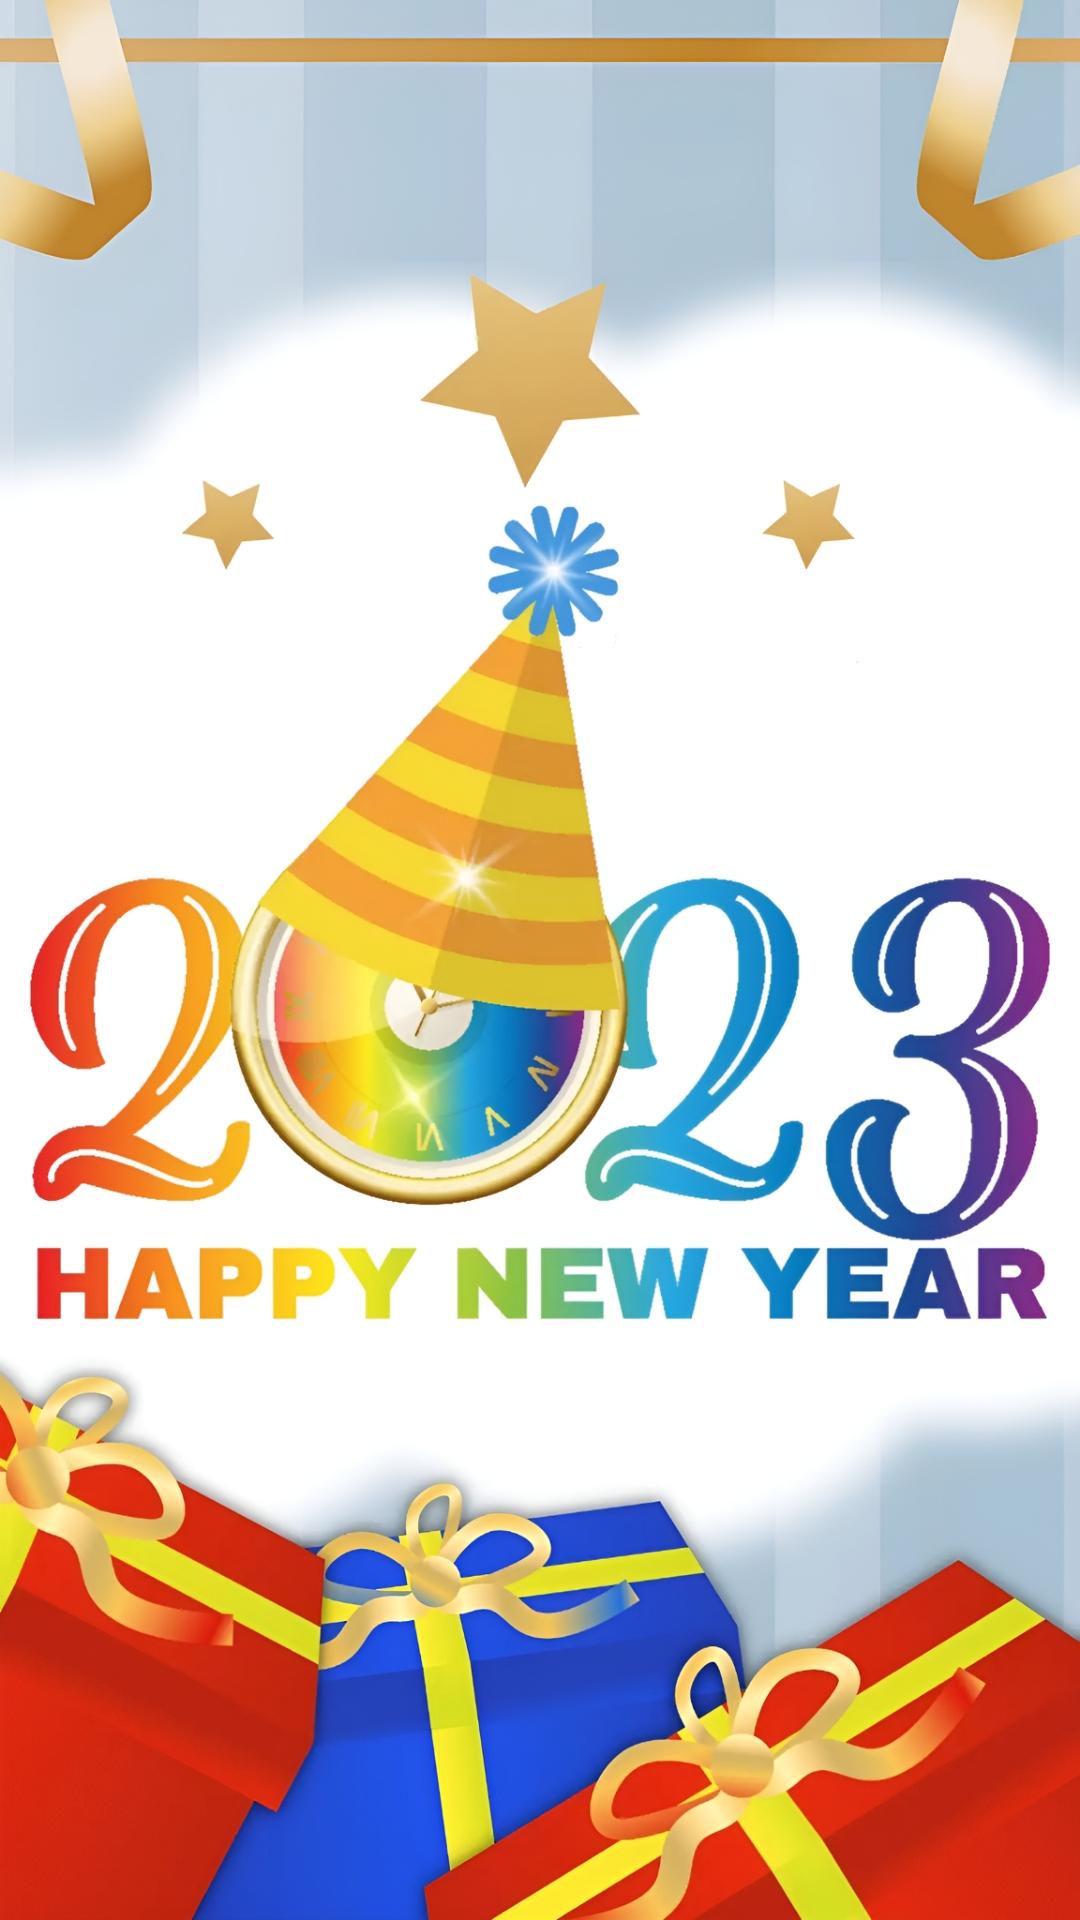 Write Name on New Year 2023 Celebration With Gift Card | New year wishes  quotes, New year wishes, How to stay motivated